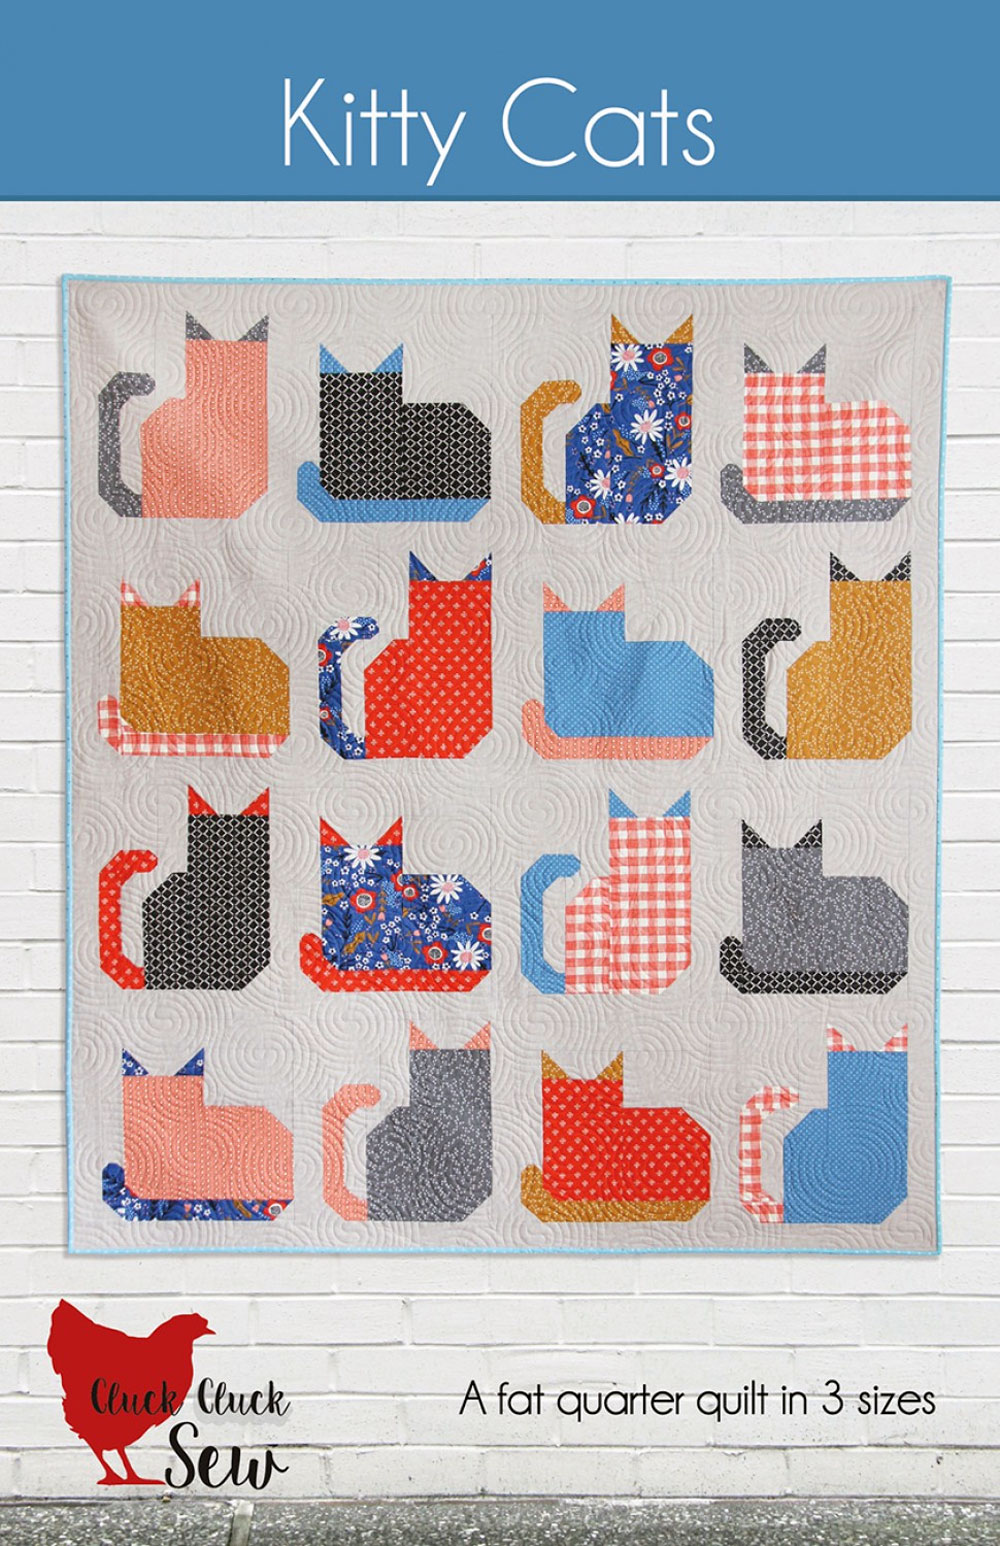 Kitty-Cats-quilt-sewing-pattern-Cluck-Cluck-Sew-front